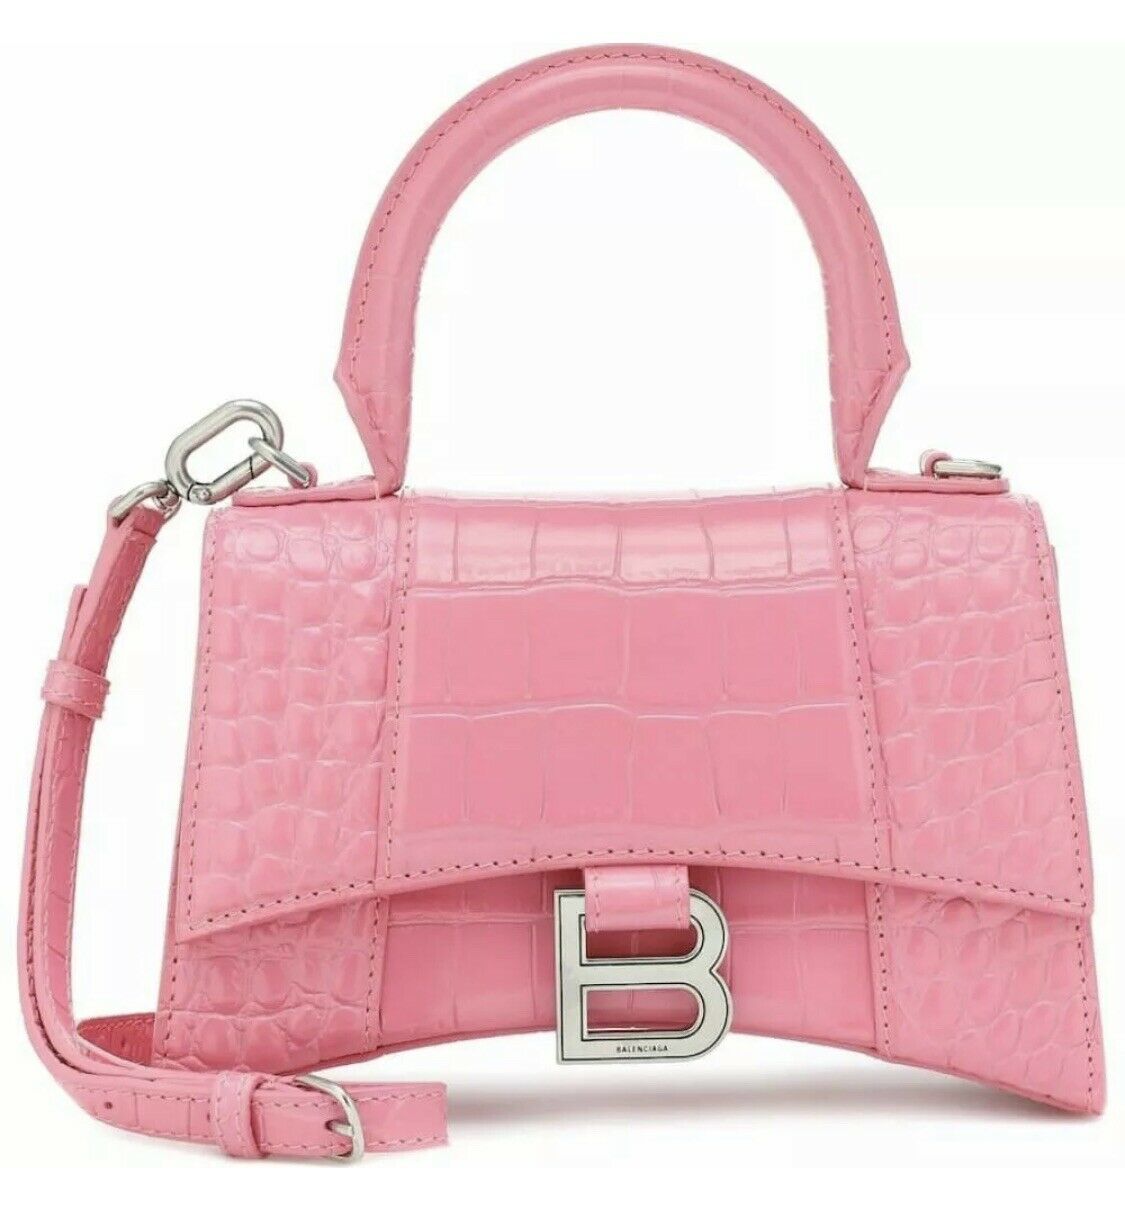 Balenciaga Women'S Tote Bag Hourglass Xs Leather Baby Pink-BRAND NEW 2021 Editio